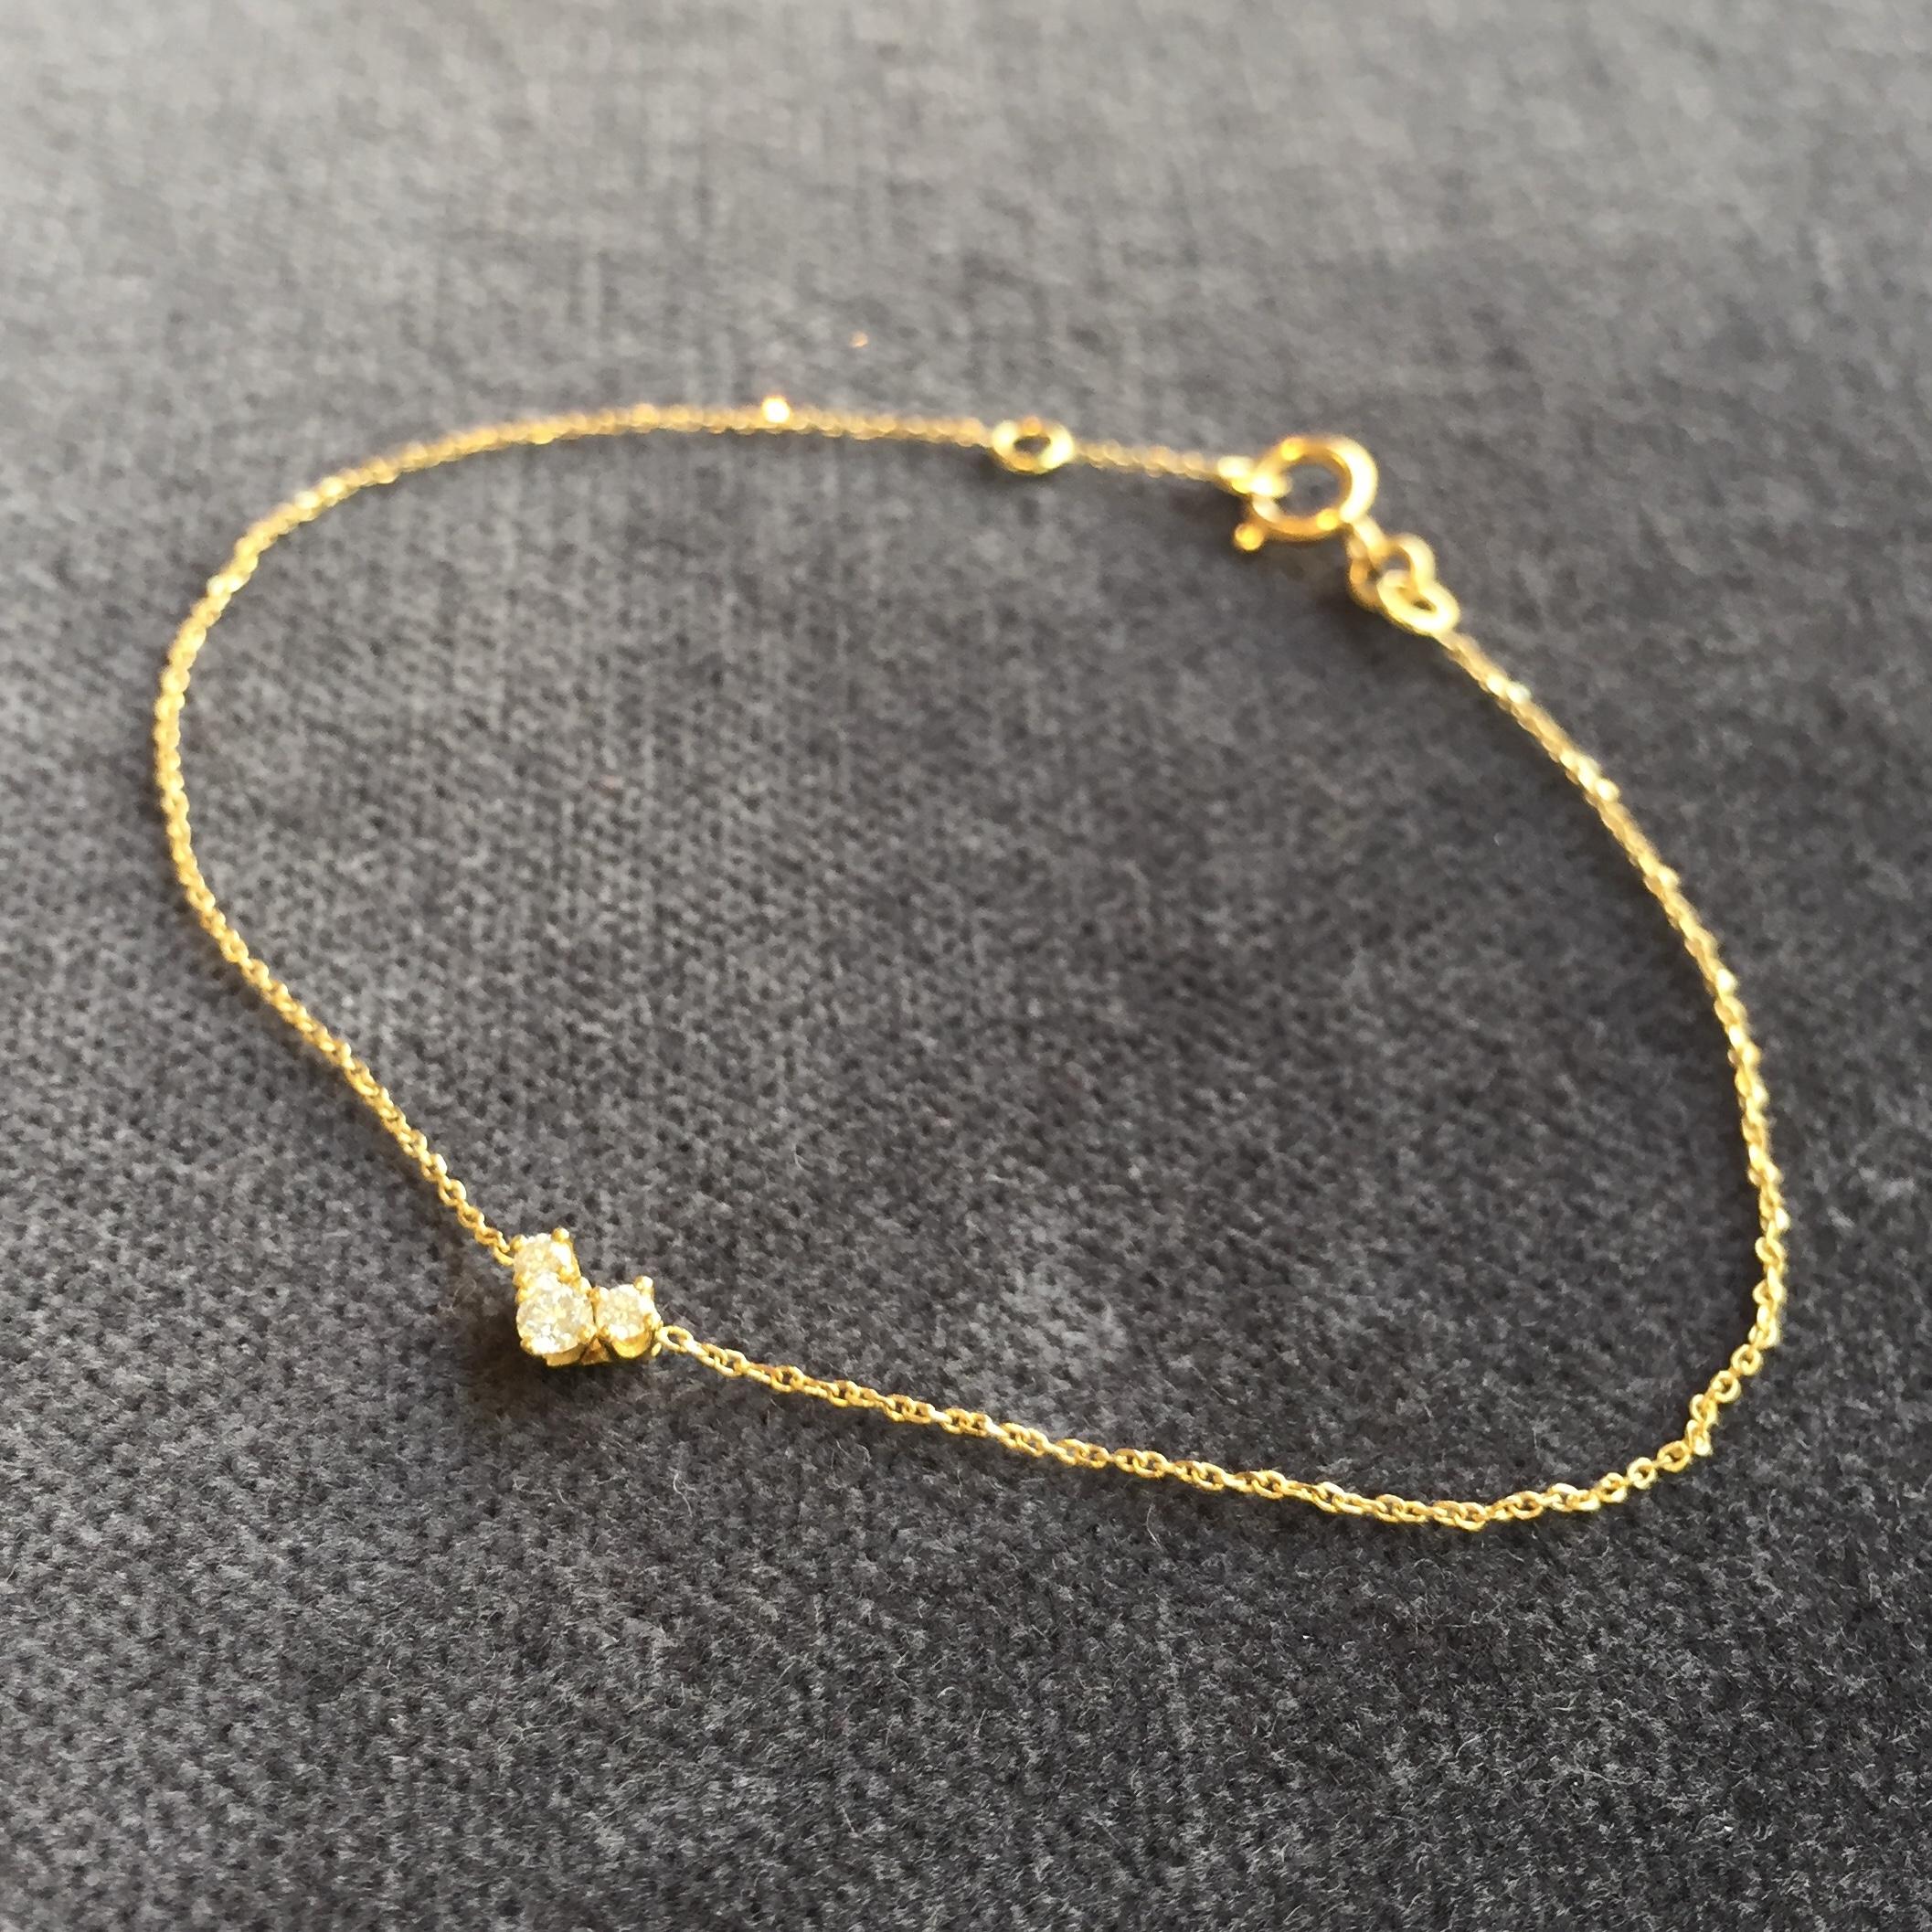 This fine chain bracelet is made in 18 karat yellow gold with a pendant of three white diamonds set in a 'V' shape, with a total weight of 0.08 carats. The total length of the bracelet is 17.5cm, but it can be made to any length; please contact us